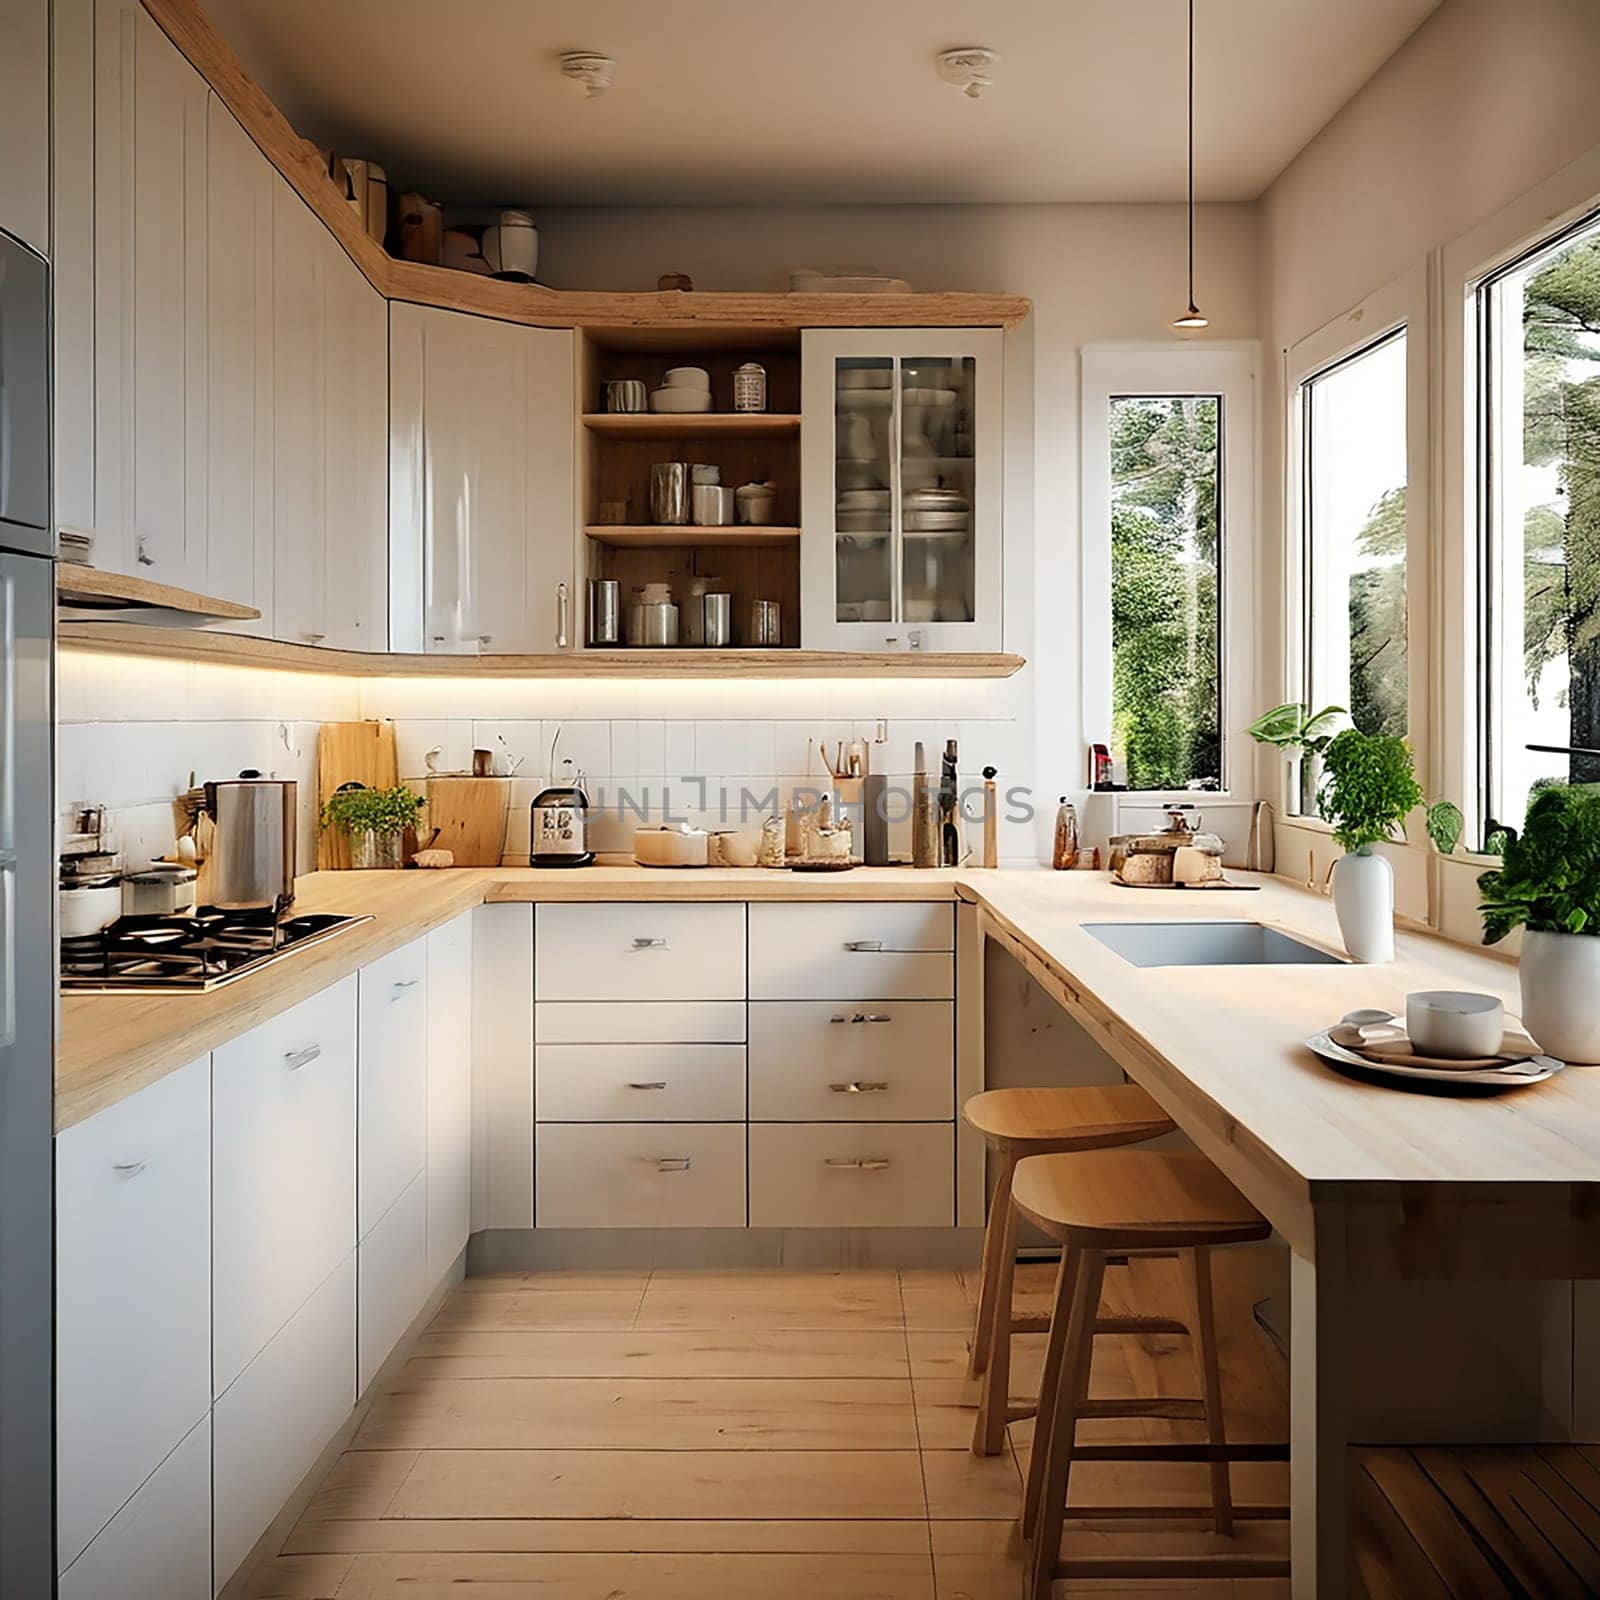 Efficiency Redefined: Designing a Kitchen for Seamless Workflow by Petrichor